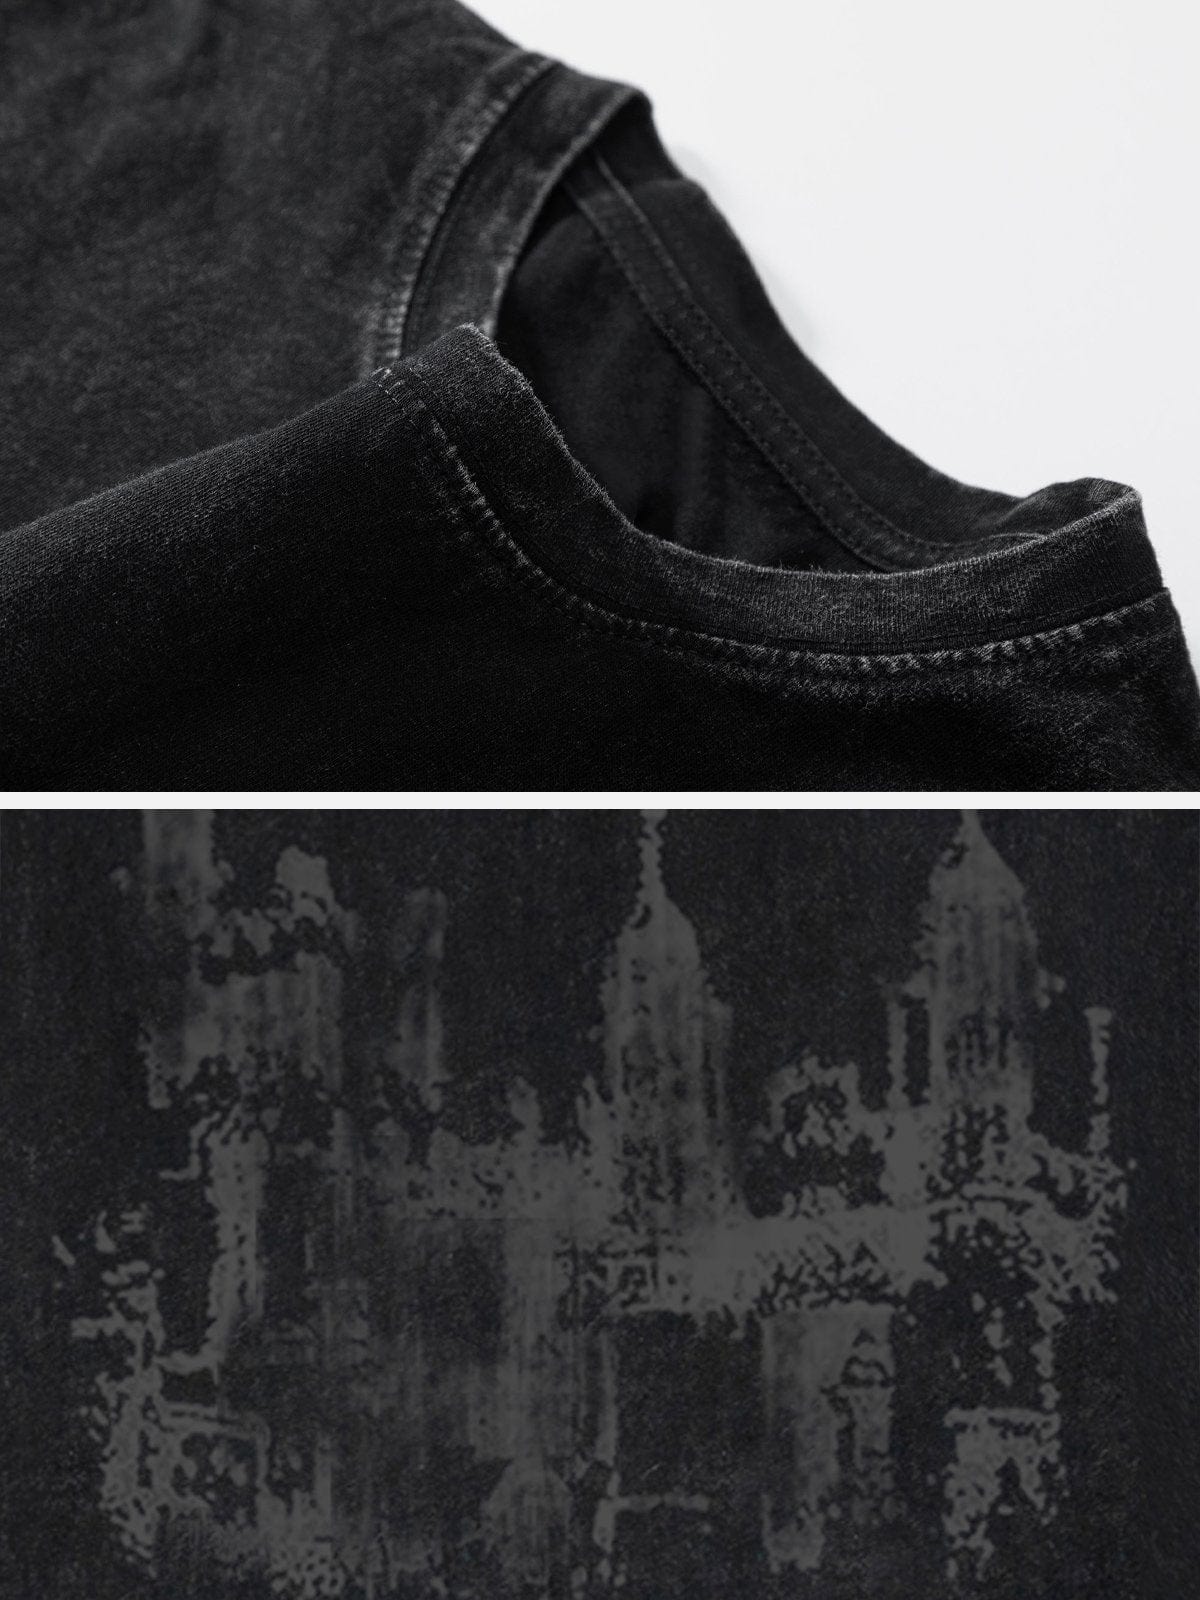 NEV Dark Castle Graphic Washed Tee